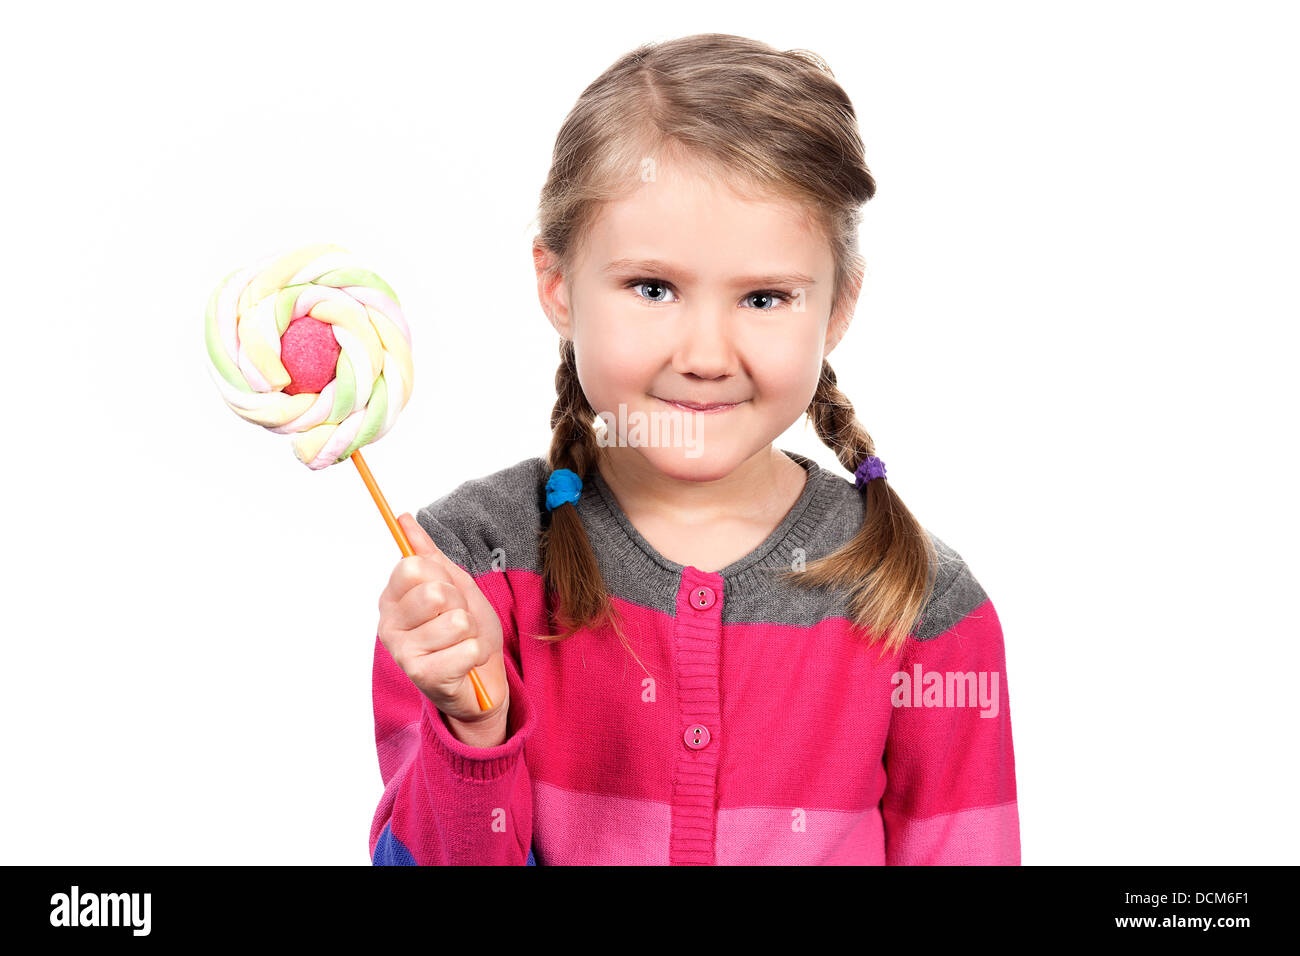 Cute girl with lollipop isolated on white background Stock Photo